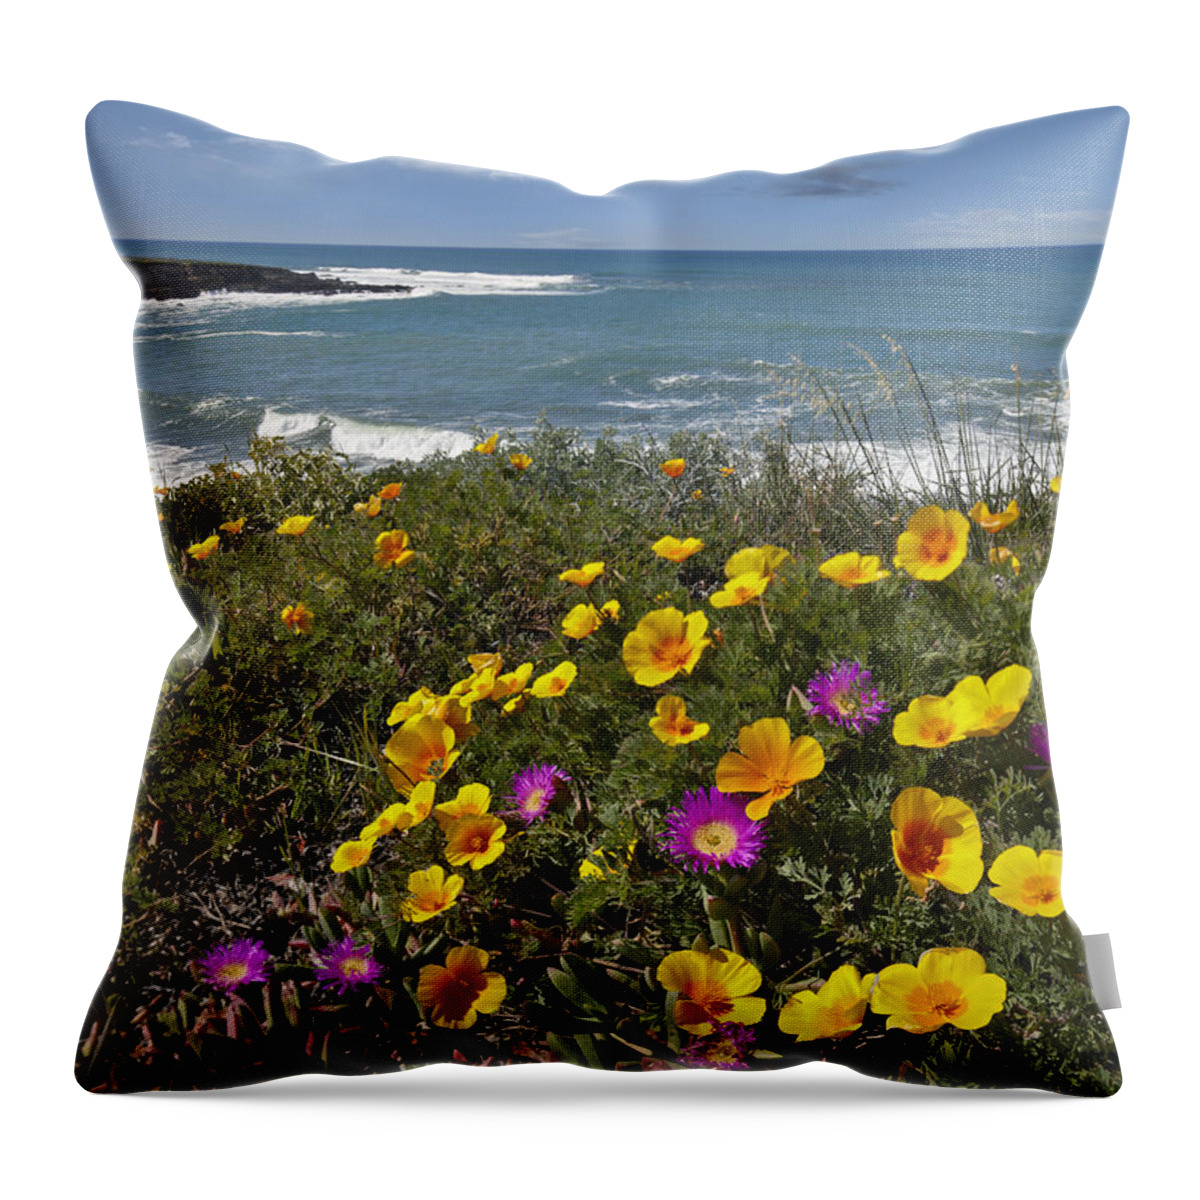 00443044 Throw Pillow featuring the photograph California Poppy And Iceplant by Tim Fitzharris